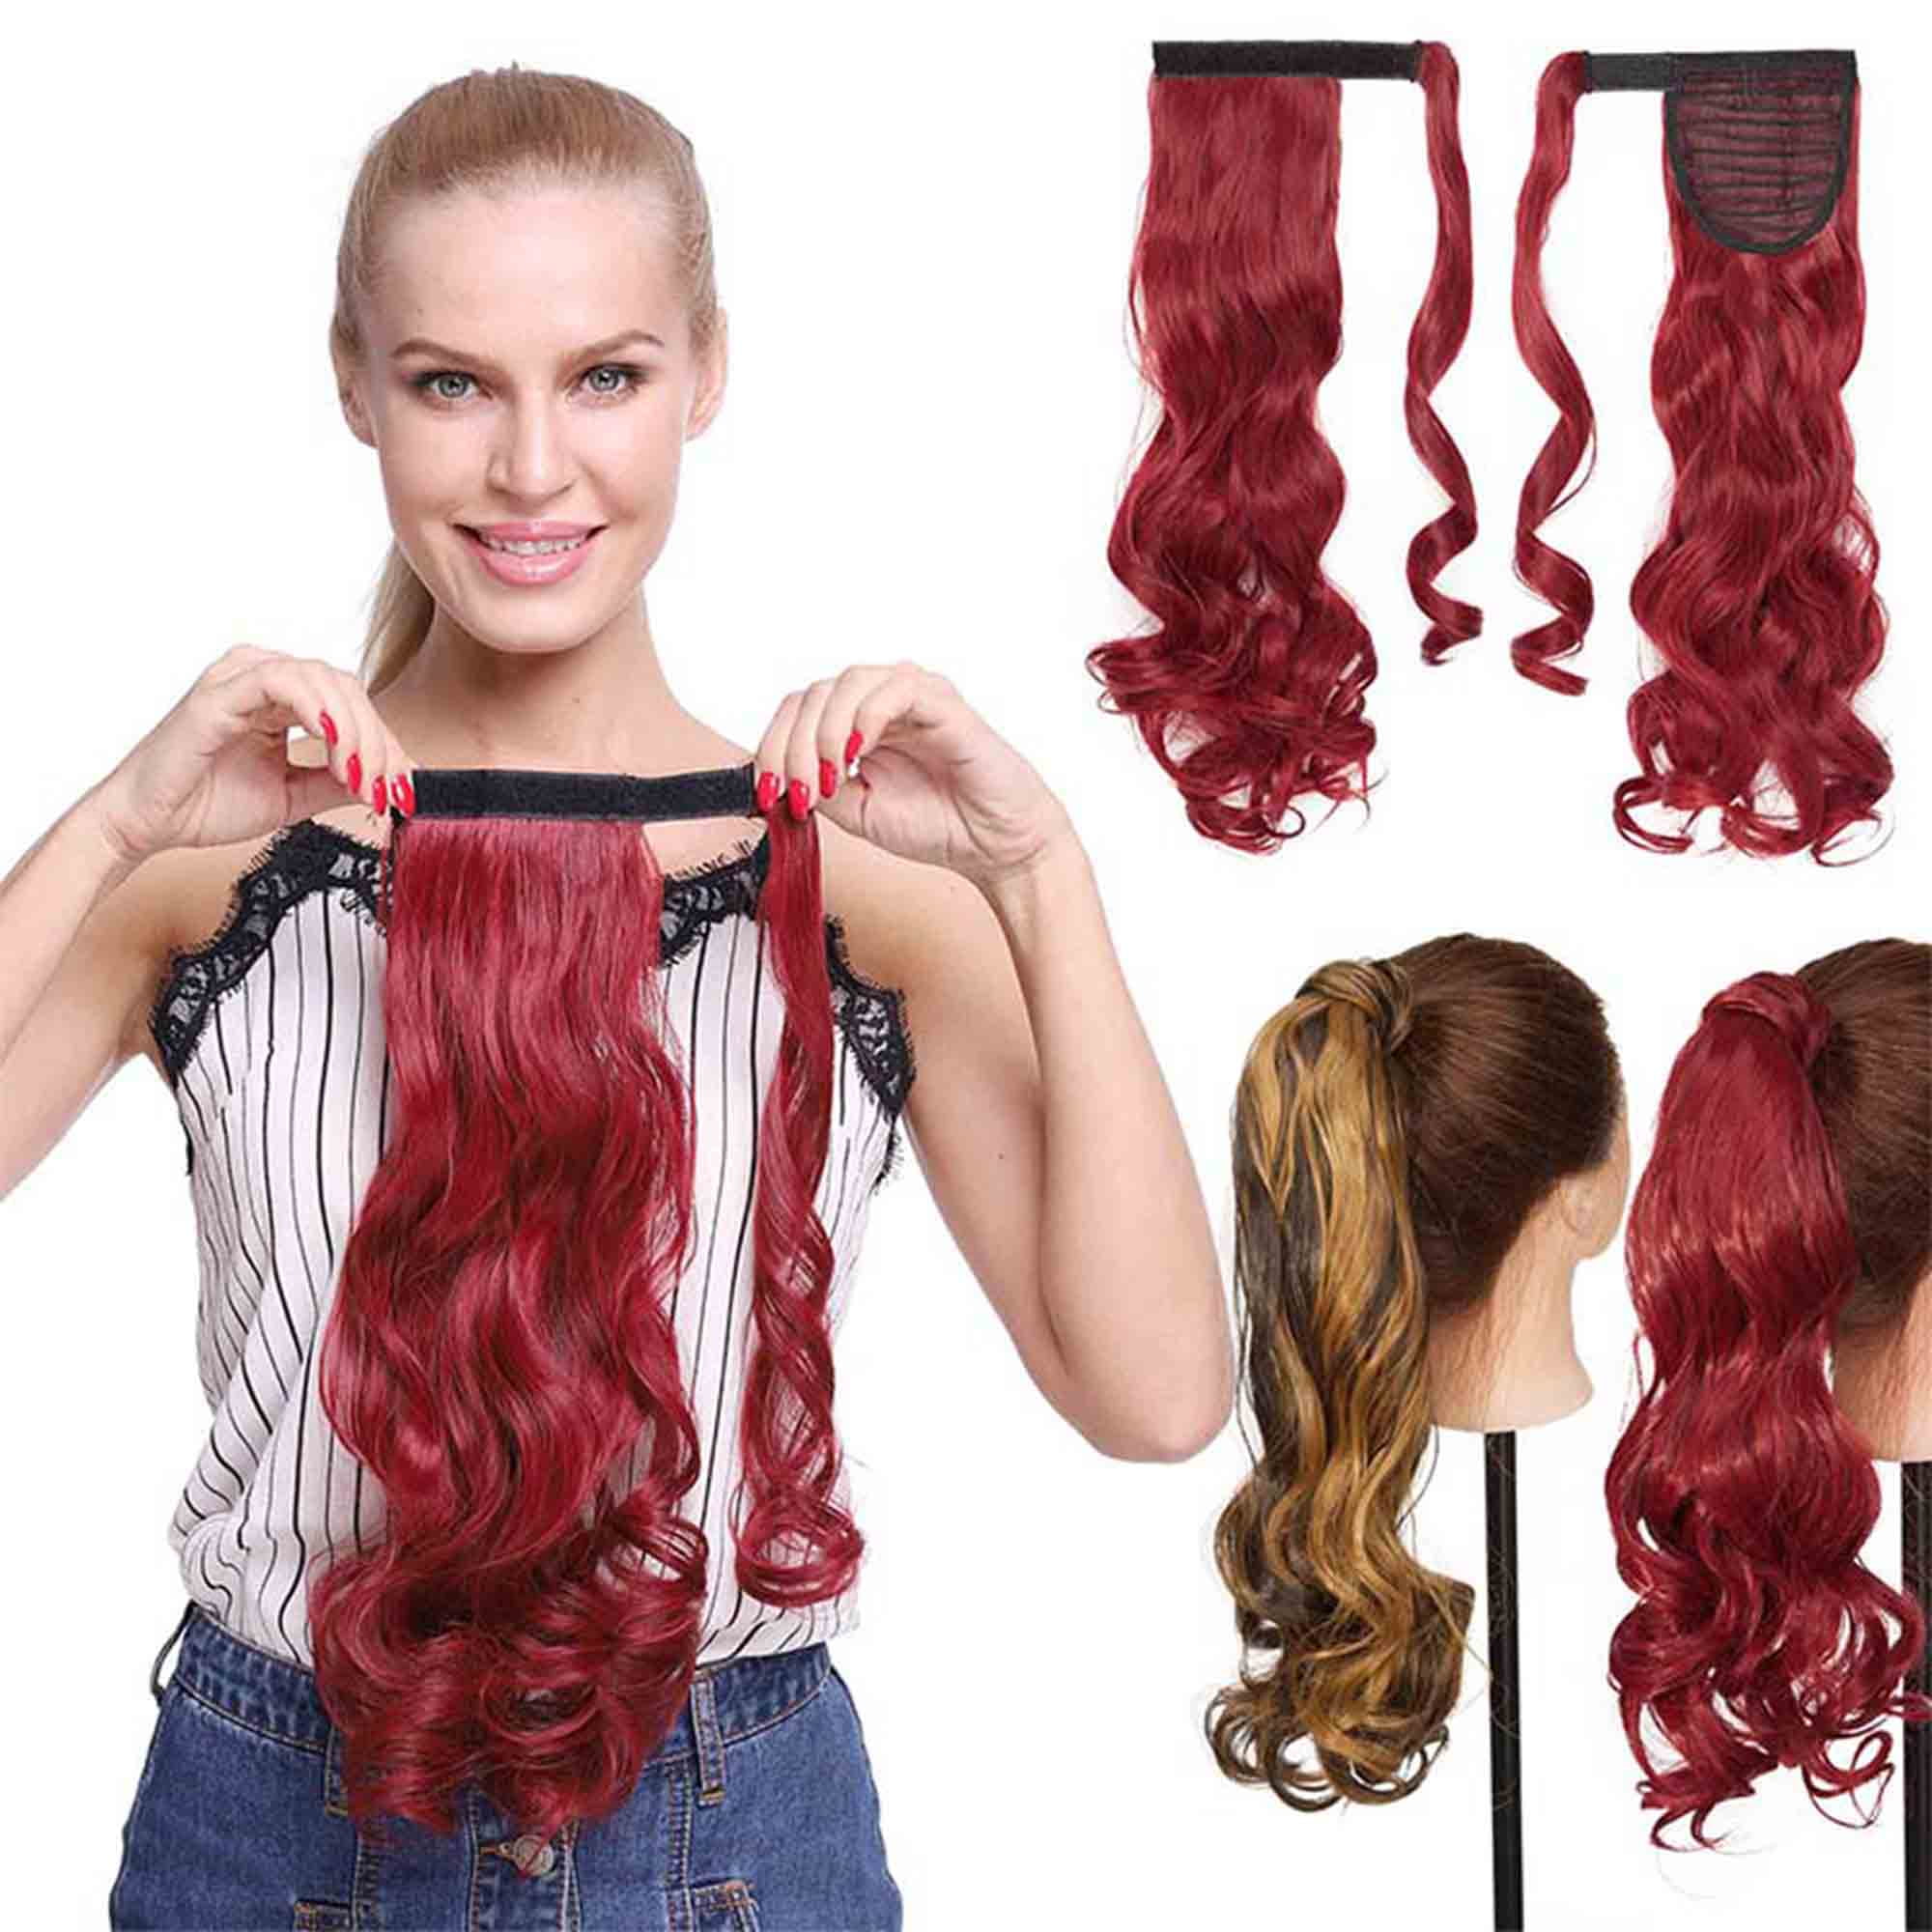 23 Long Straight Wrap Around Ponytail Clip in Hair Extensions One Piece Hairpiece Magic Tape in Pony Tail Extension for Women Wine Red